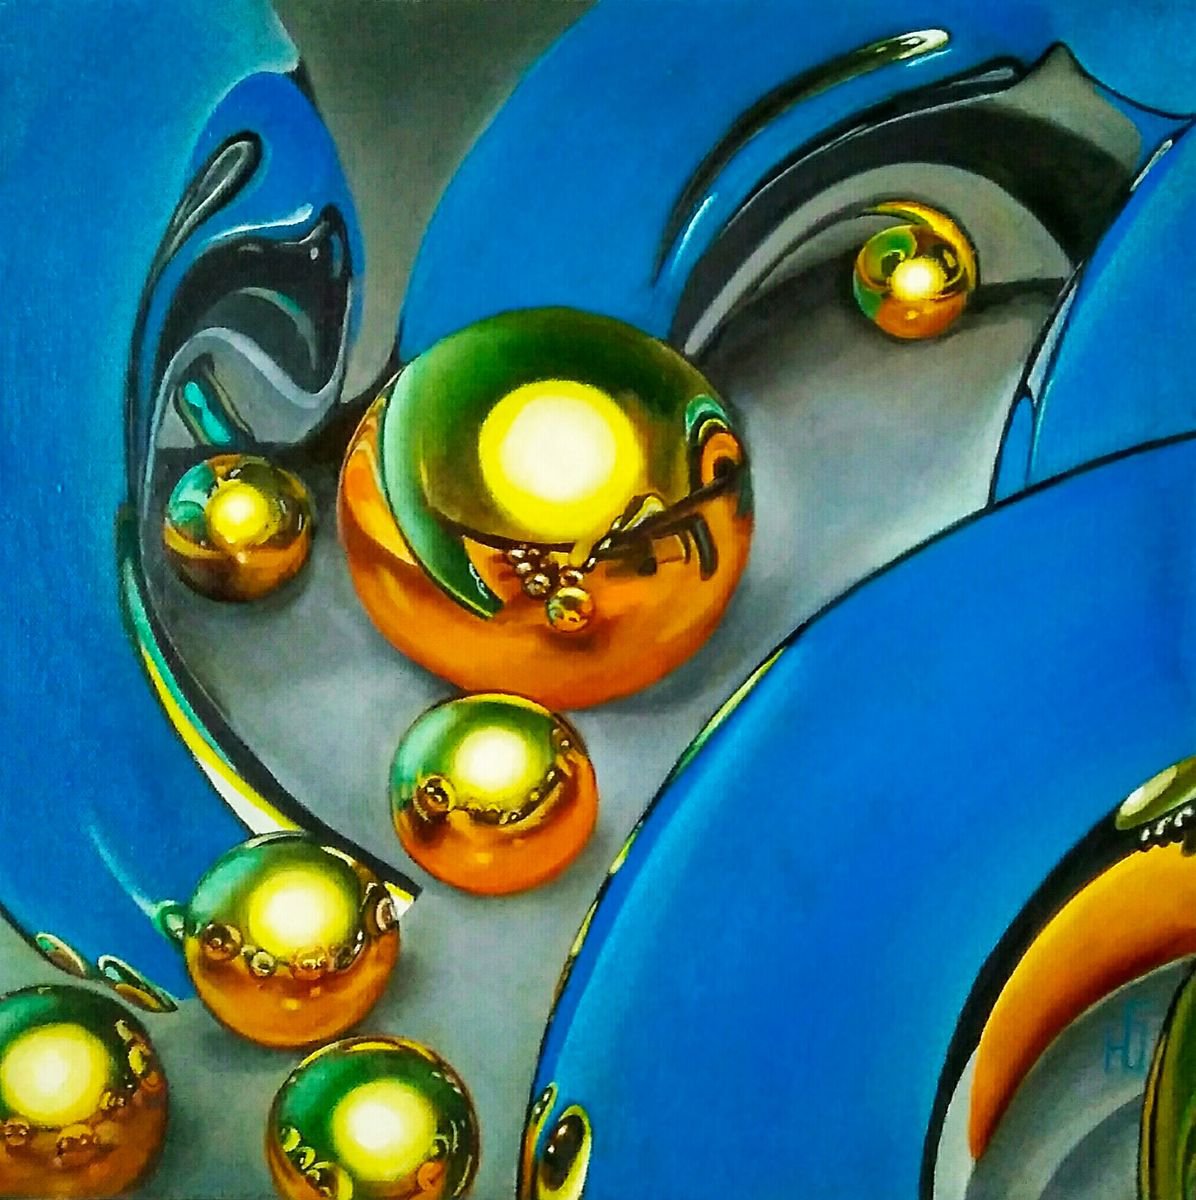 Abstraction Golden Spheres Blue Background Oil Painting Hyperrealism by Yulia Berseneva